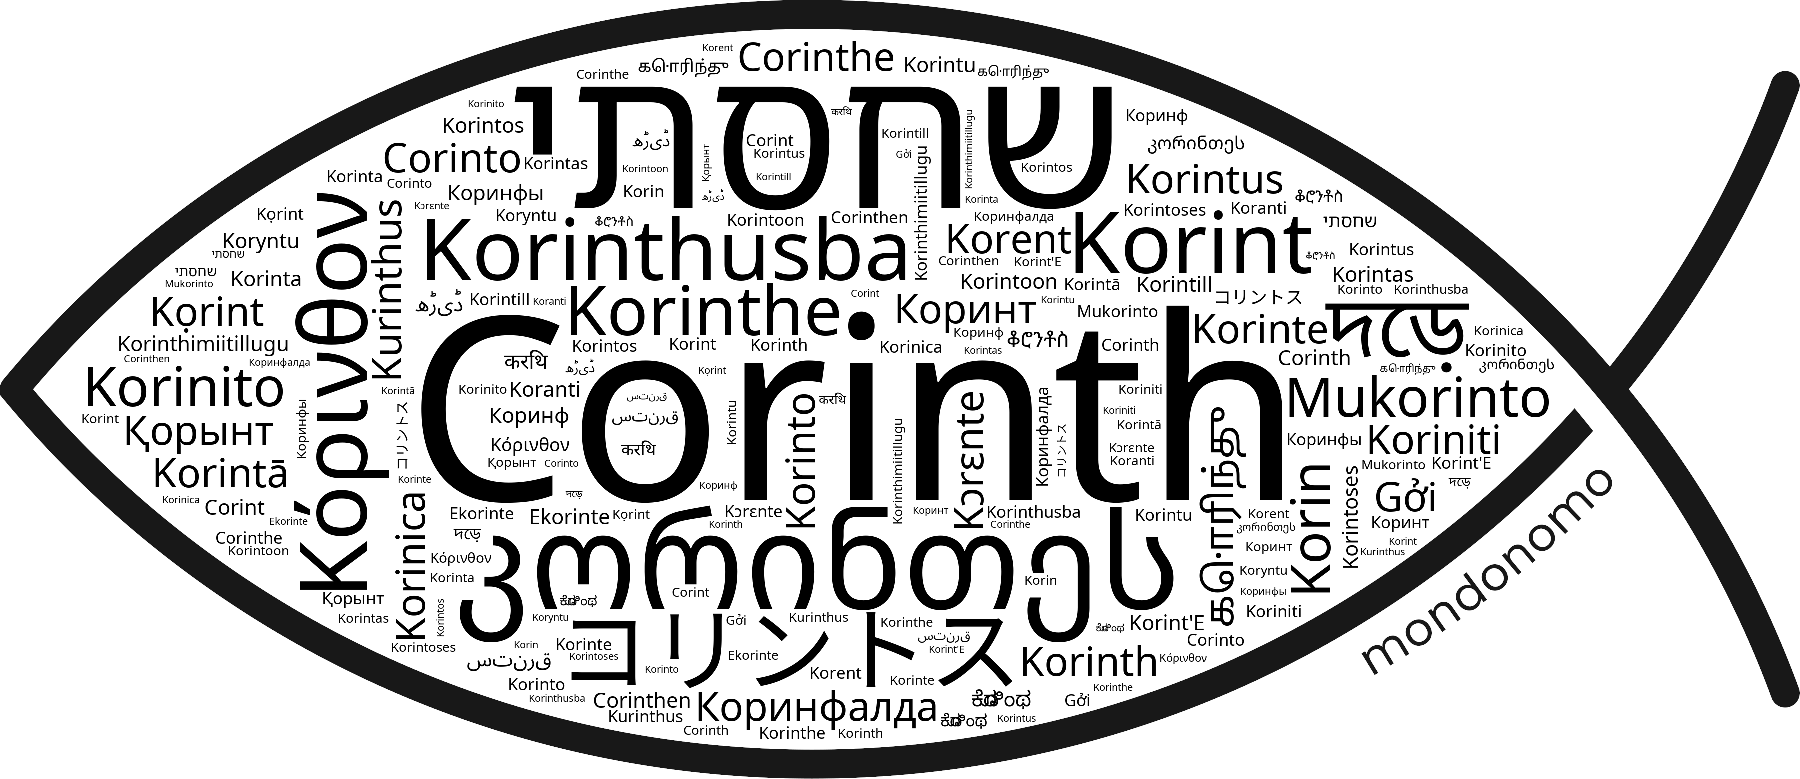 Name Corinth in the world's Bibles